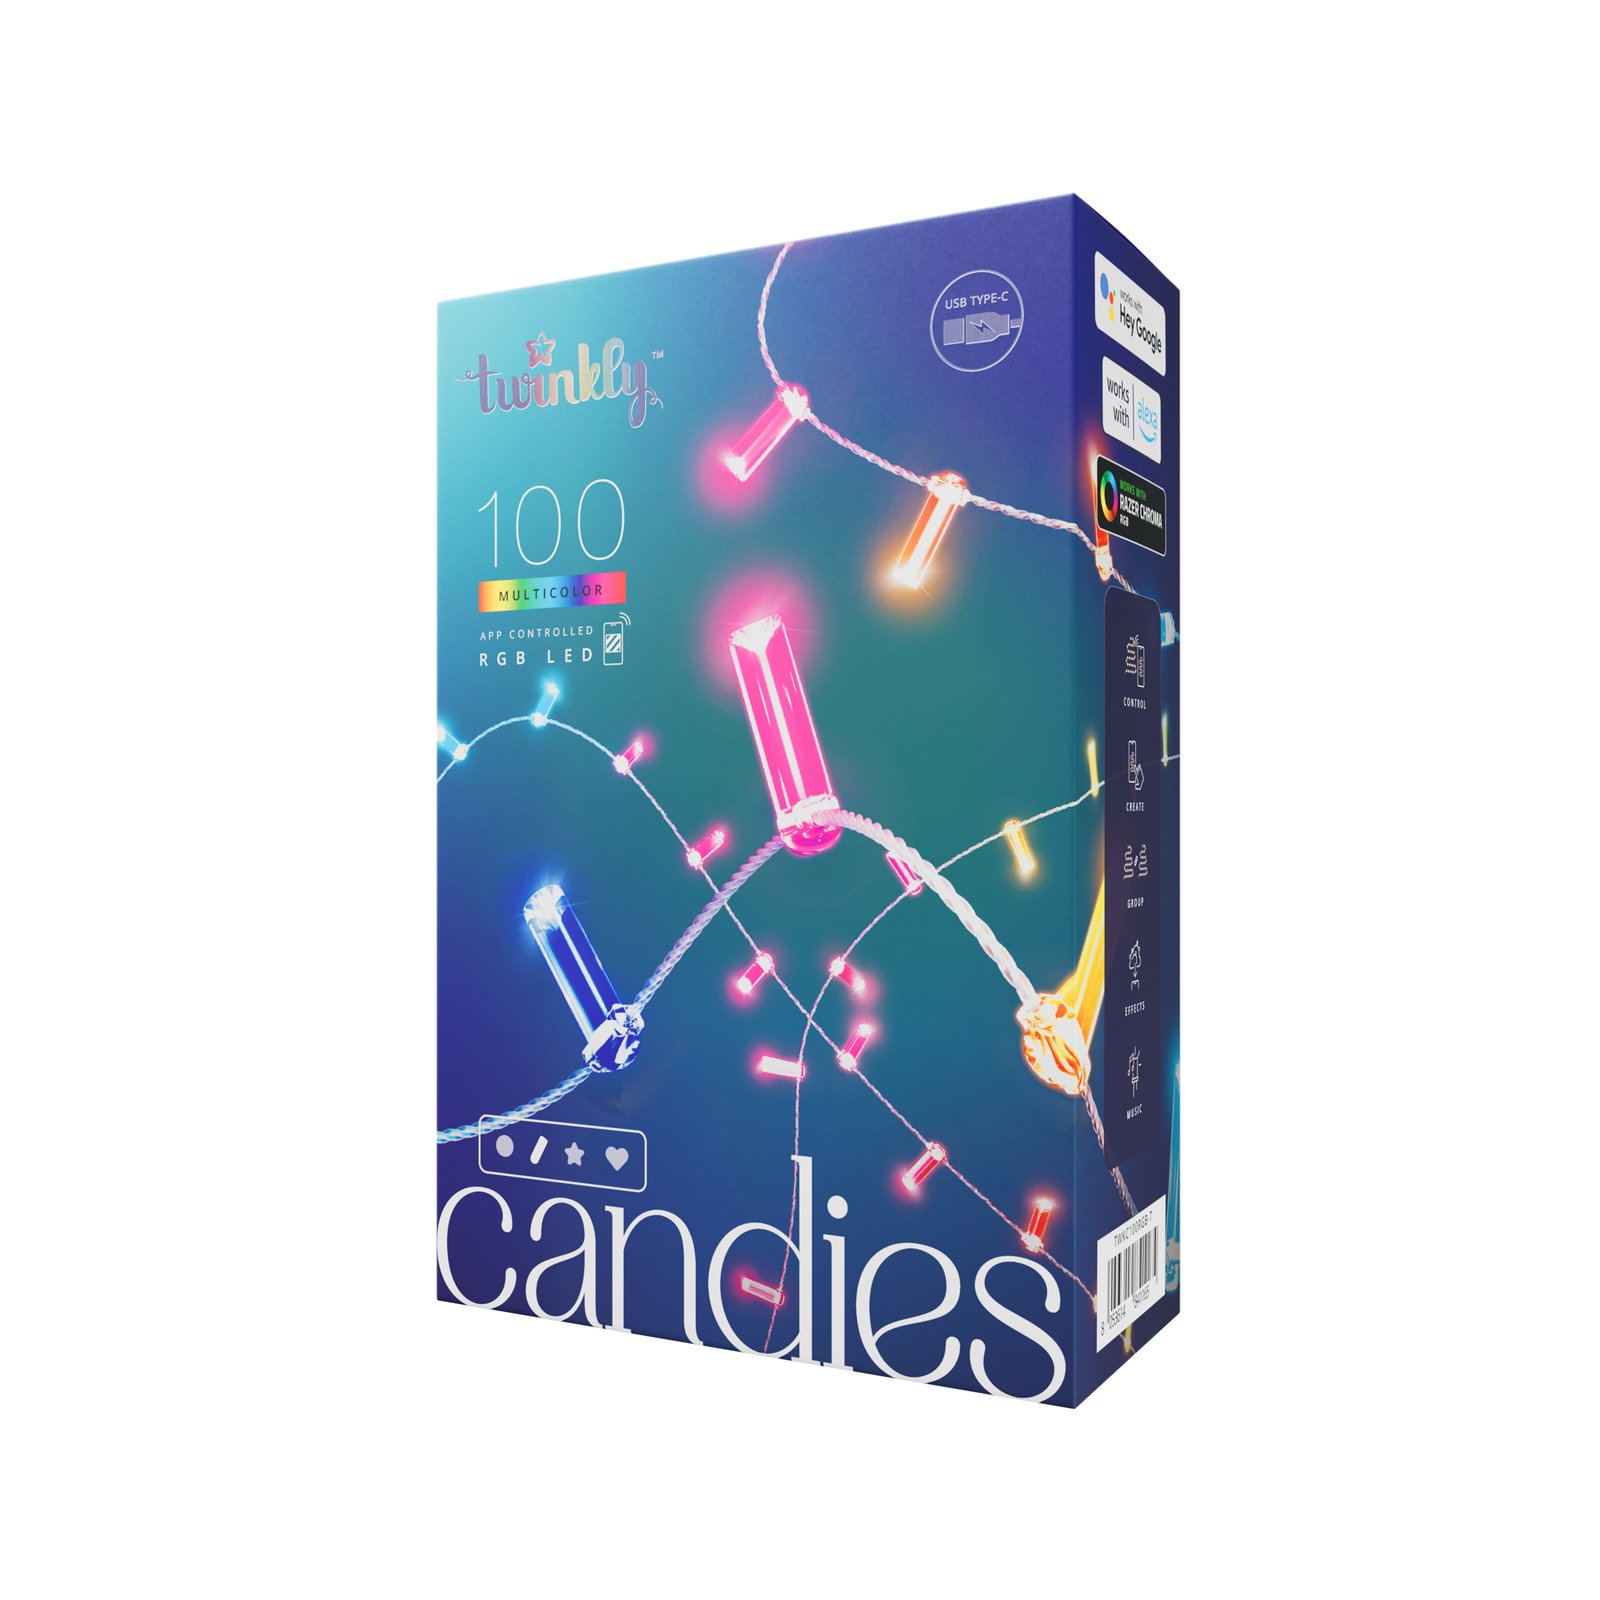 Twinkly Candies 100 Smart cable transparente 6m